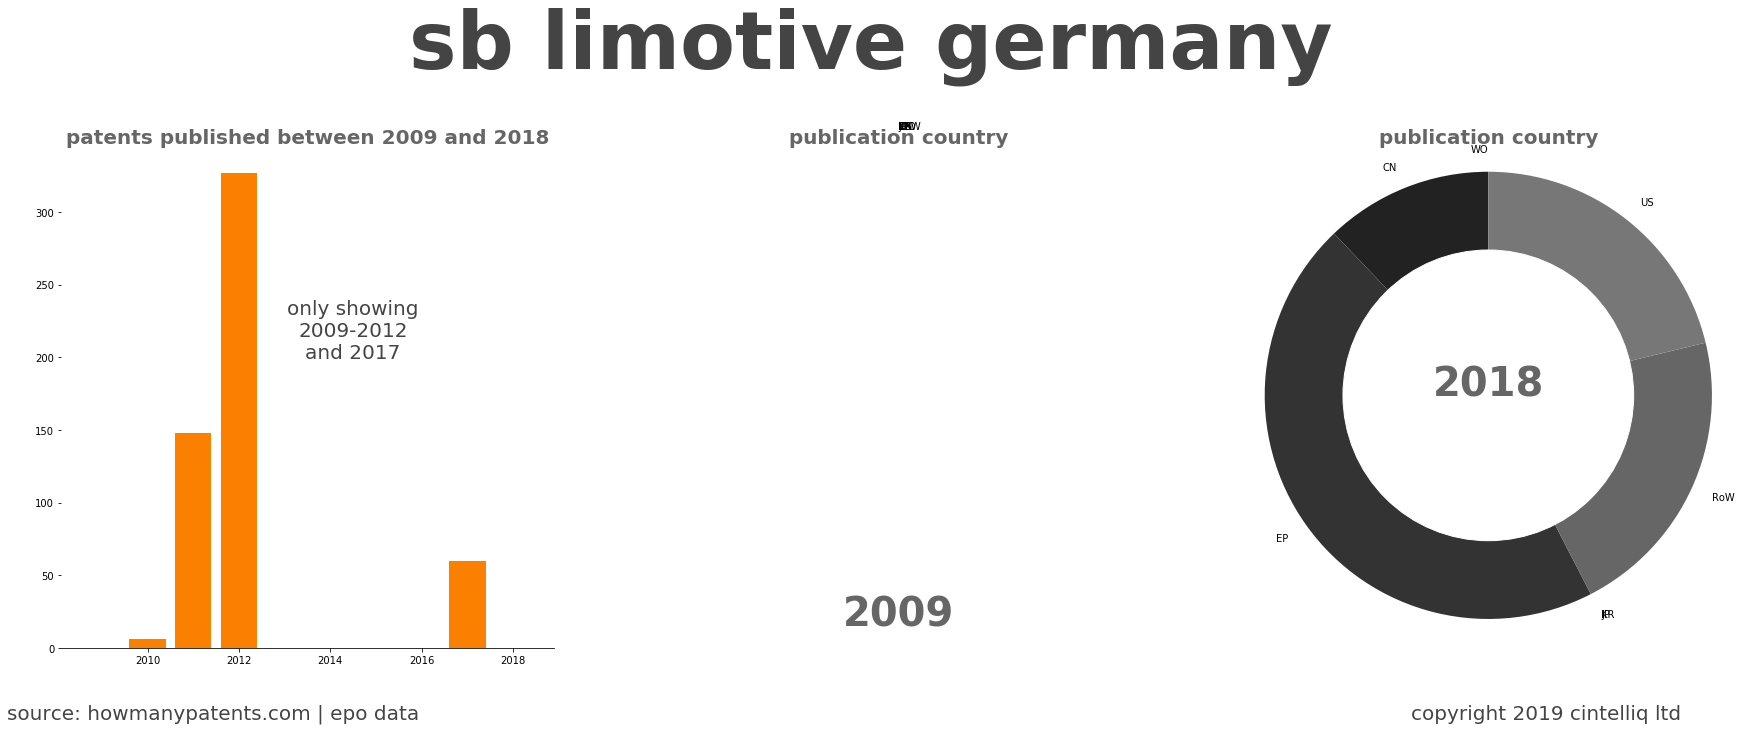 summary of patents for Sb Limotive Germany